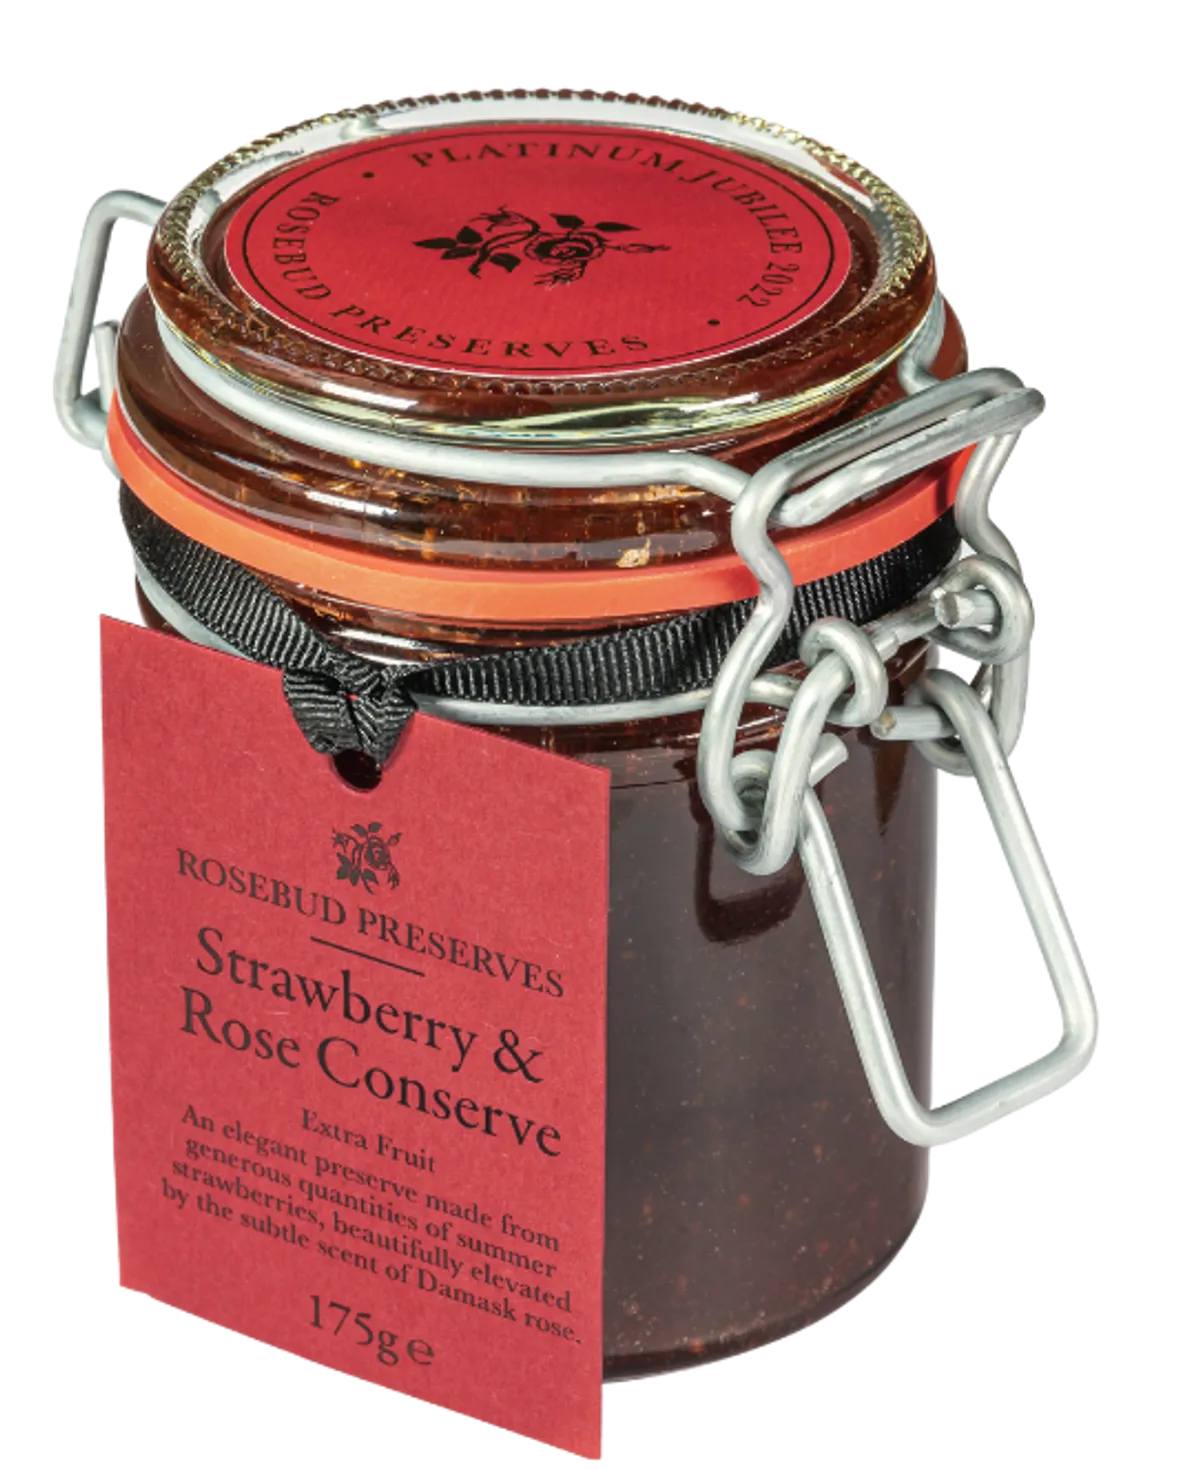 Strawberry and rose conserve